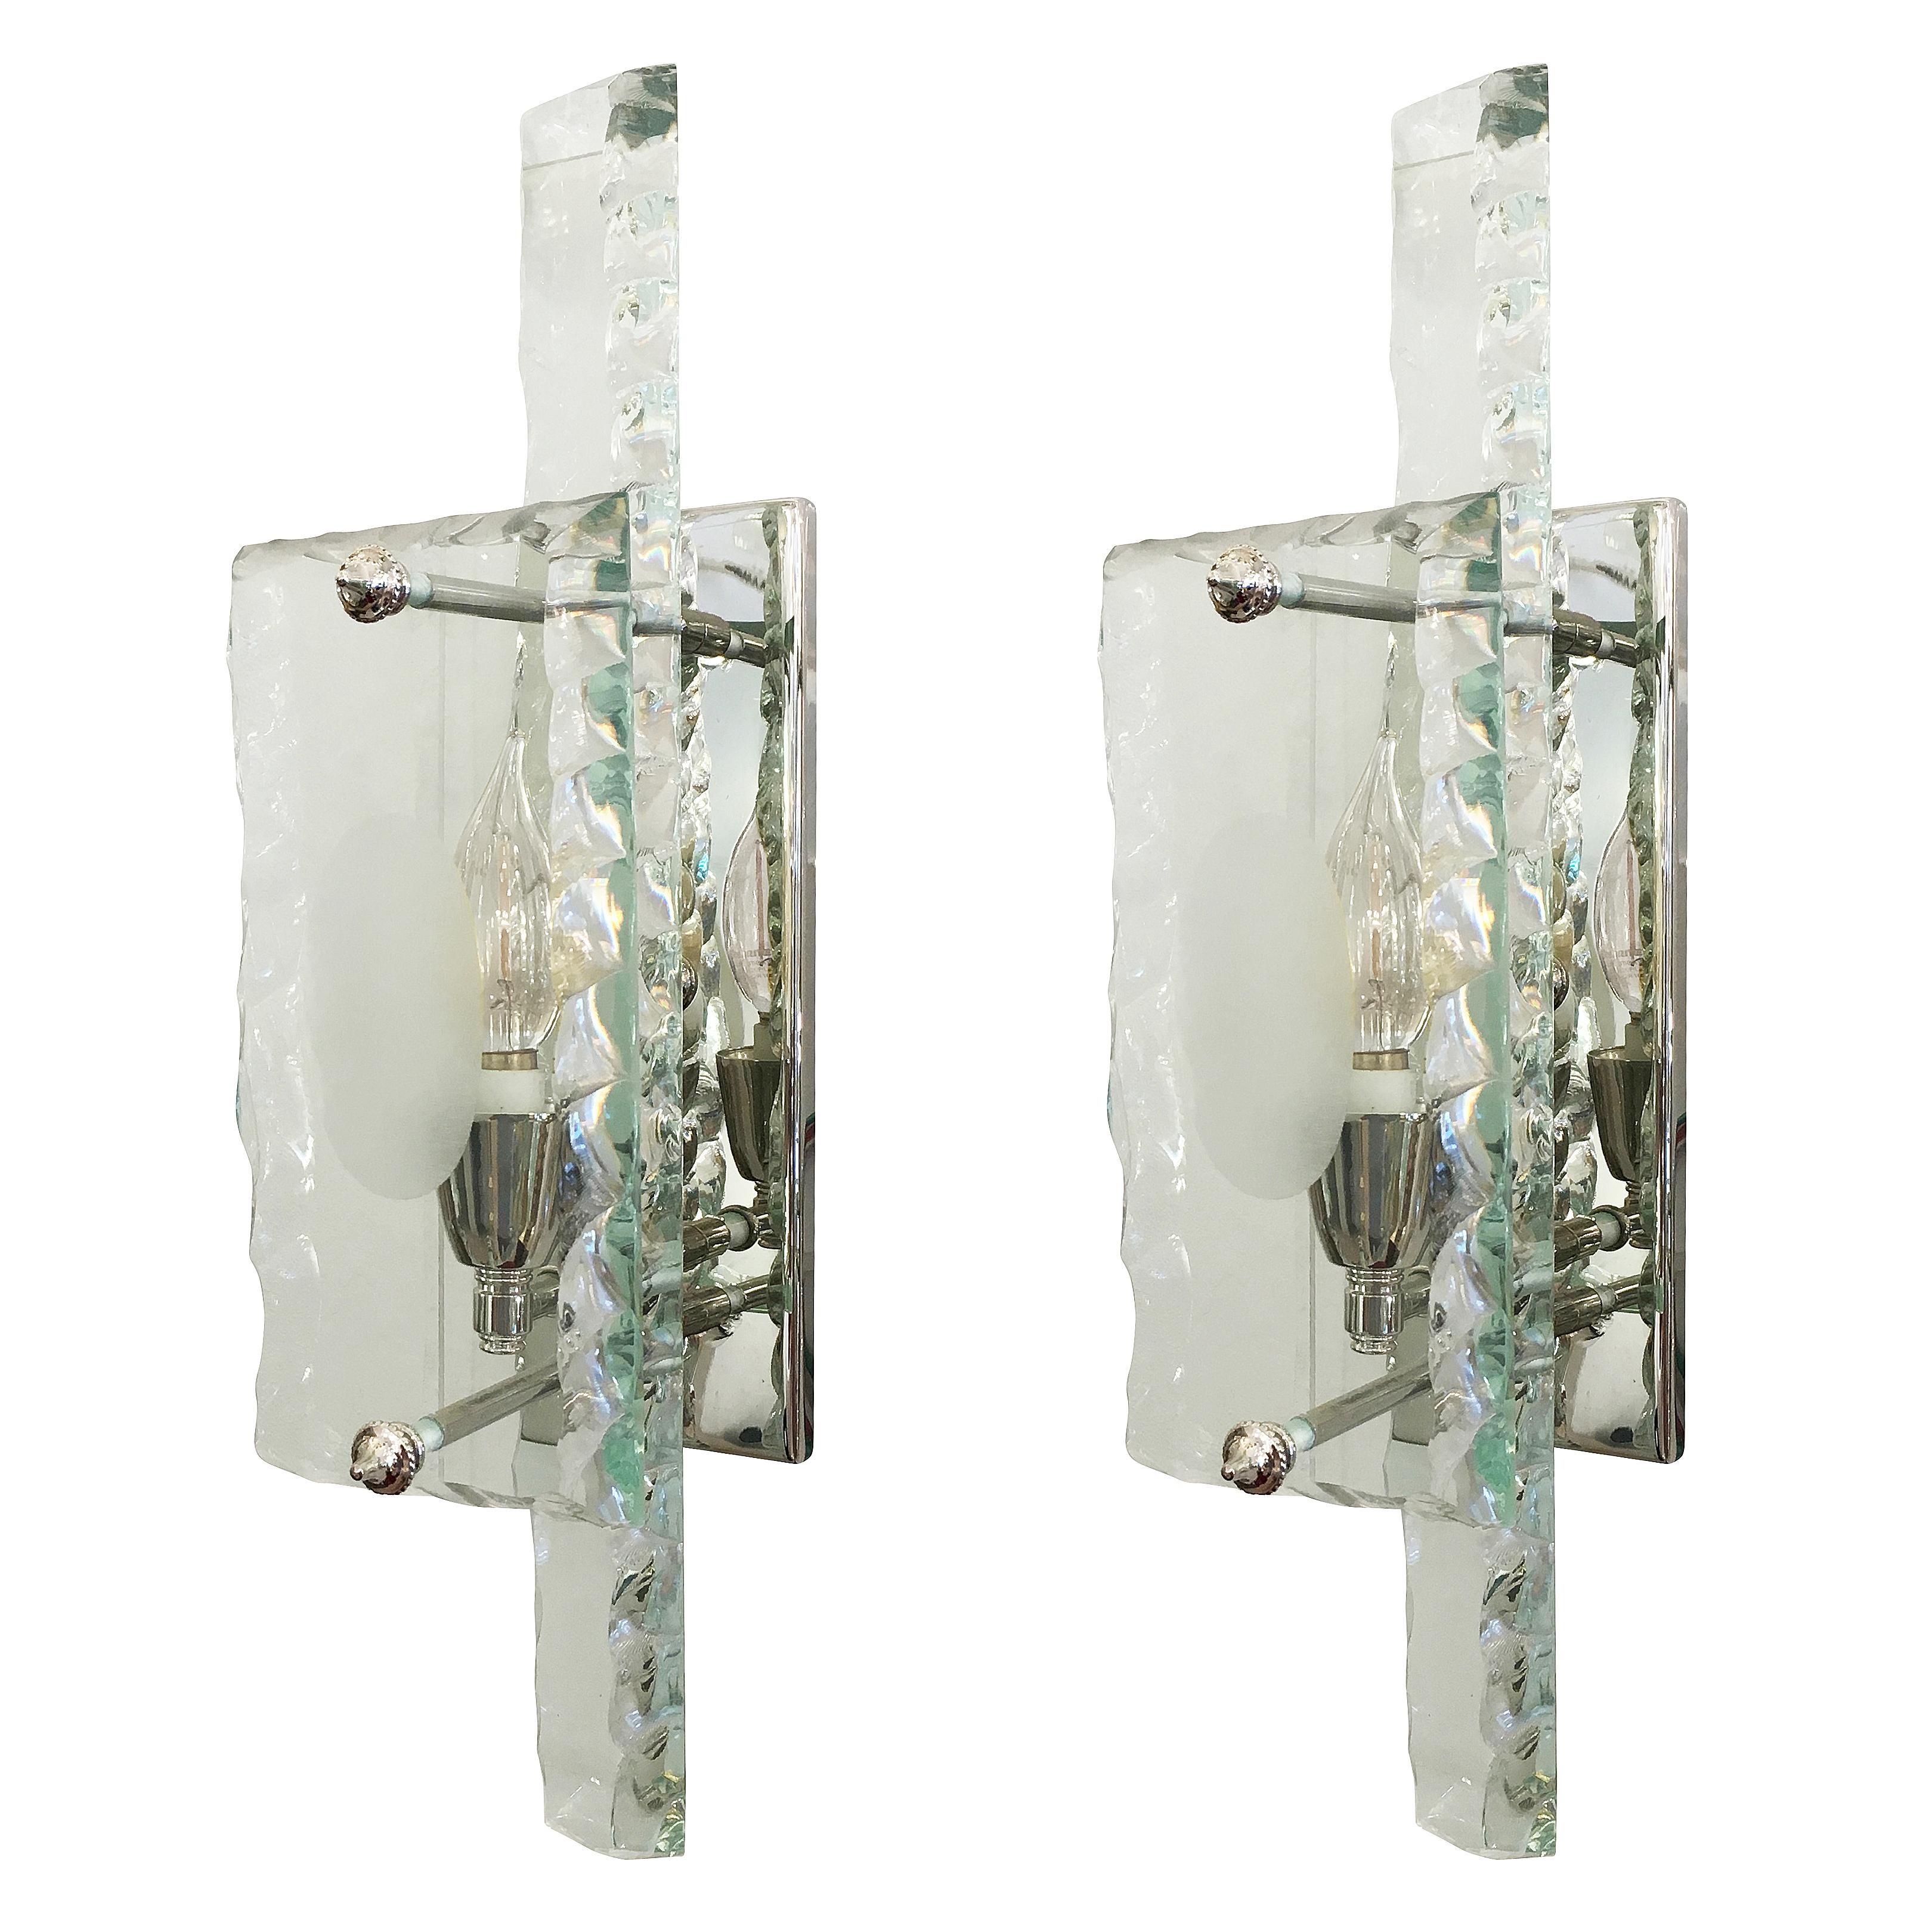 Sculptural set of Italian Mid-Century sconces by ZeroQuattro influenced by the designs of Fontana Arte. They feature two thick slabs of glass hand chiseled along the borders. The slab closer to the back plate is narrow and elongated while the front